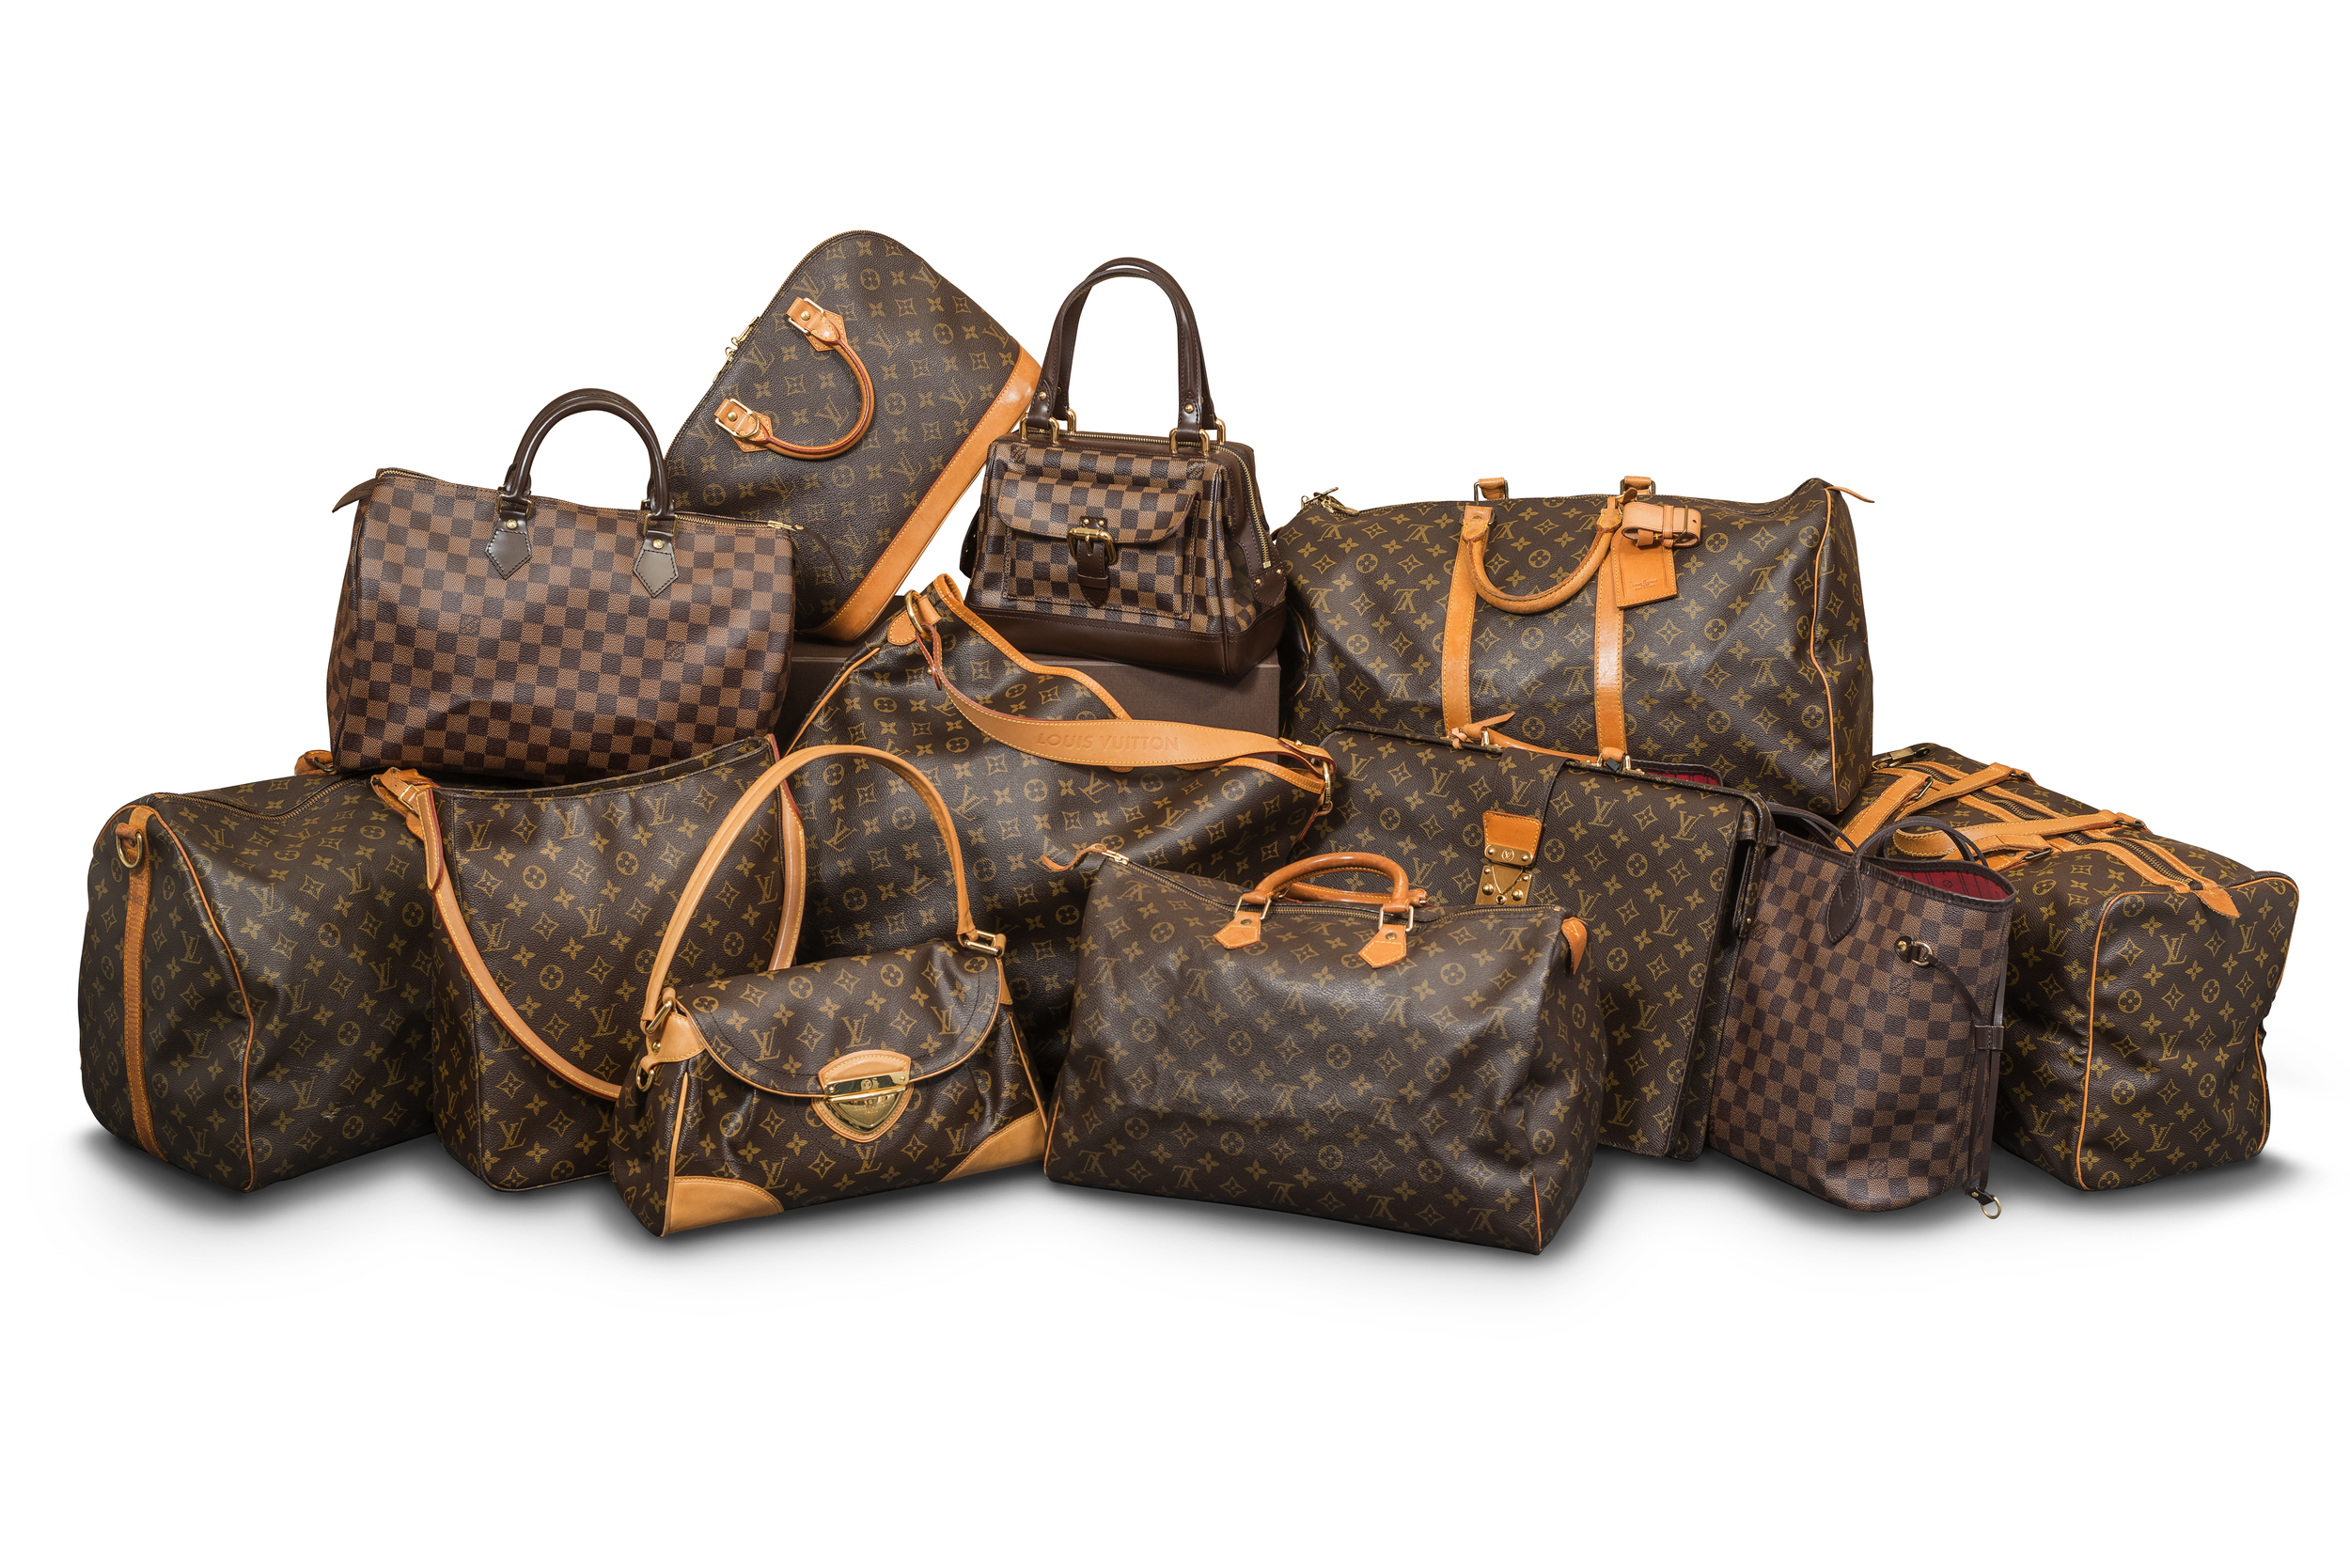 CVLUX Magazine  #LUXlife — LUX Handbags: Authentic Luxury presented by Fresno  Coin / Louis Vuitton